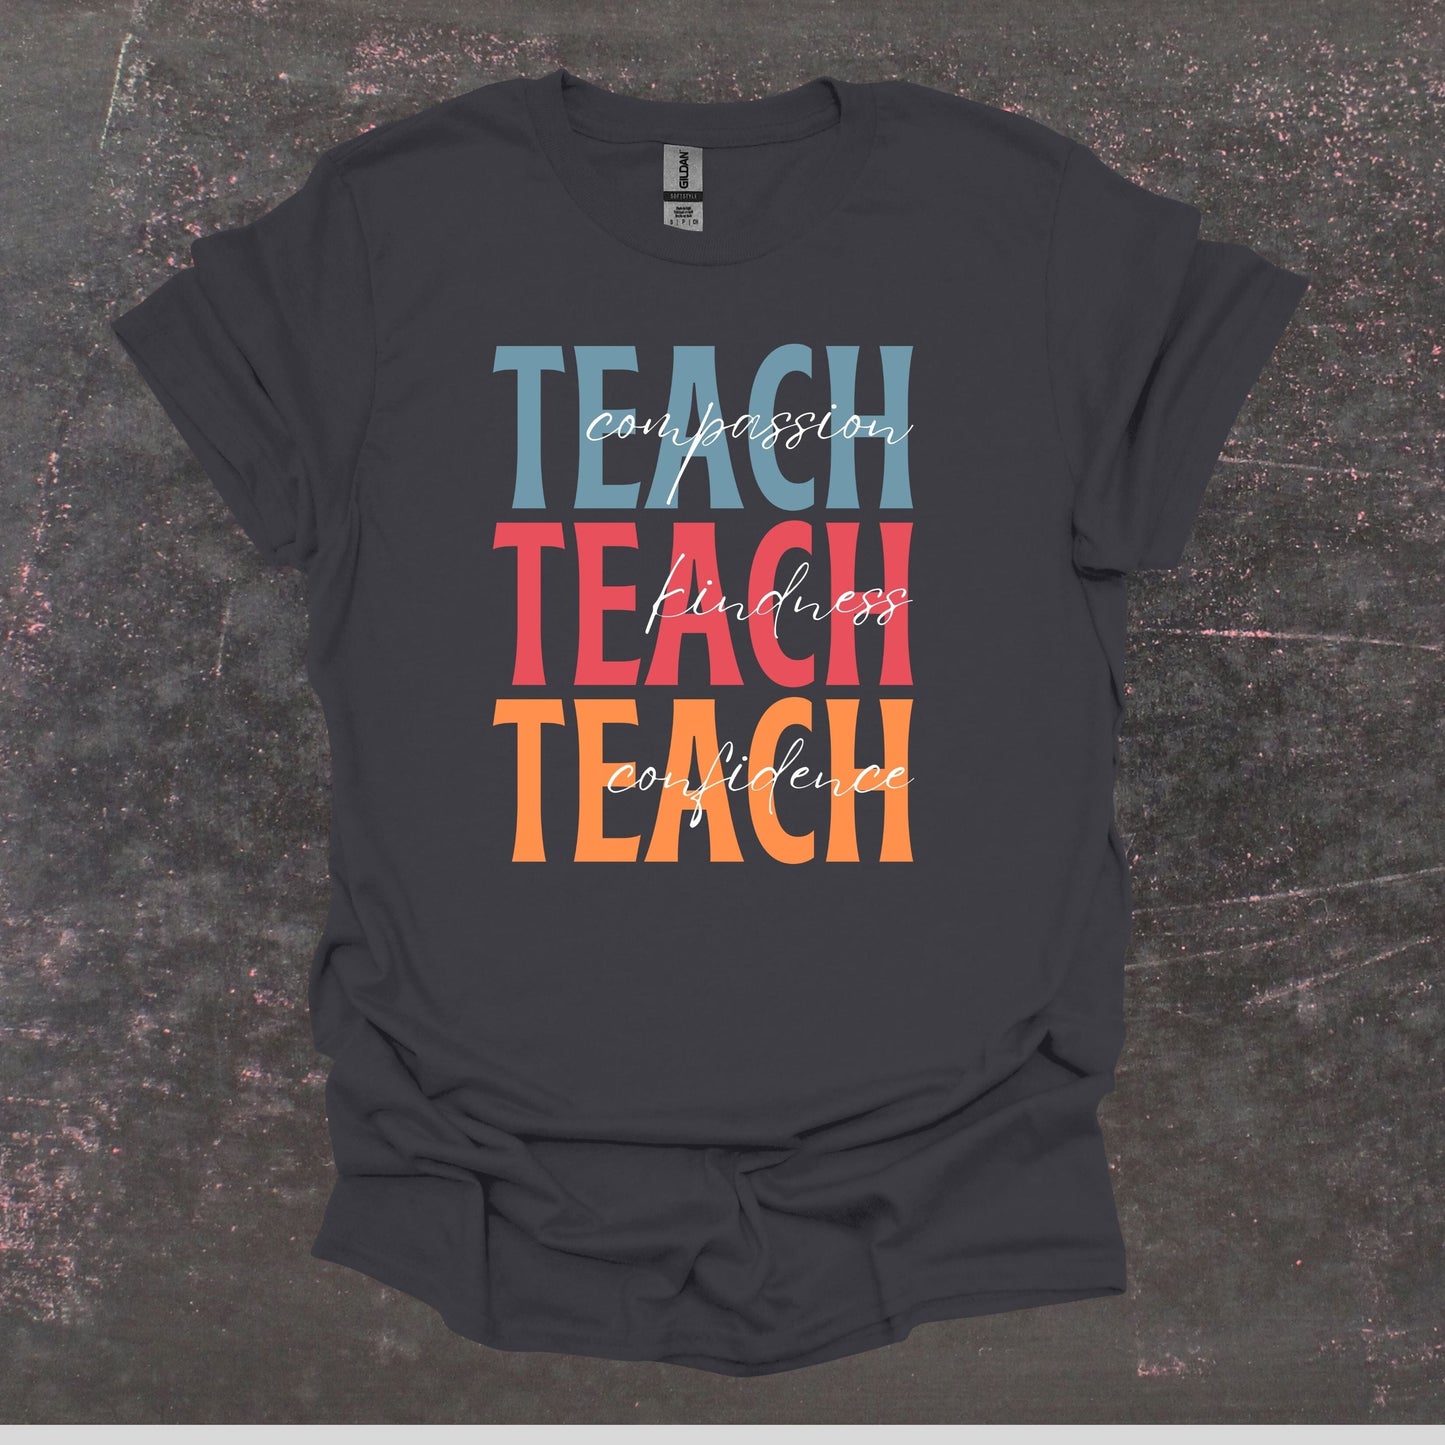 Teach Compassion Kindness Confidence - Teacher T Shirt - Adult Tee Shirts T-Shirts Graphic Avenue Charcoal Adult Small 